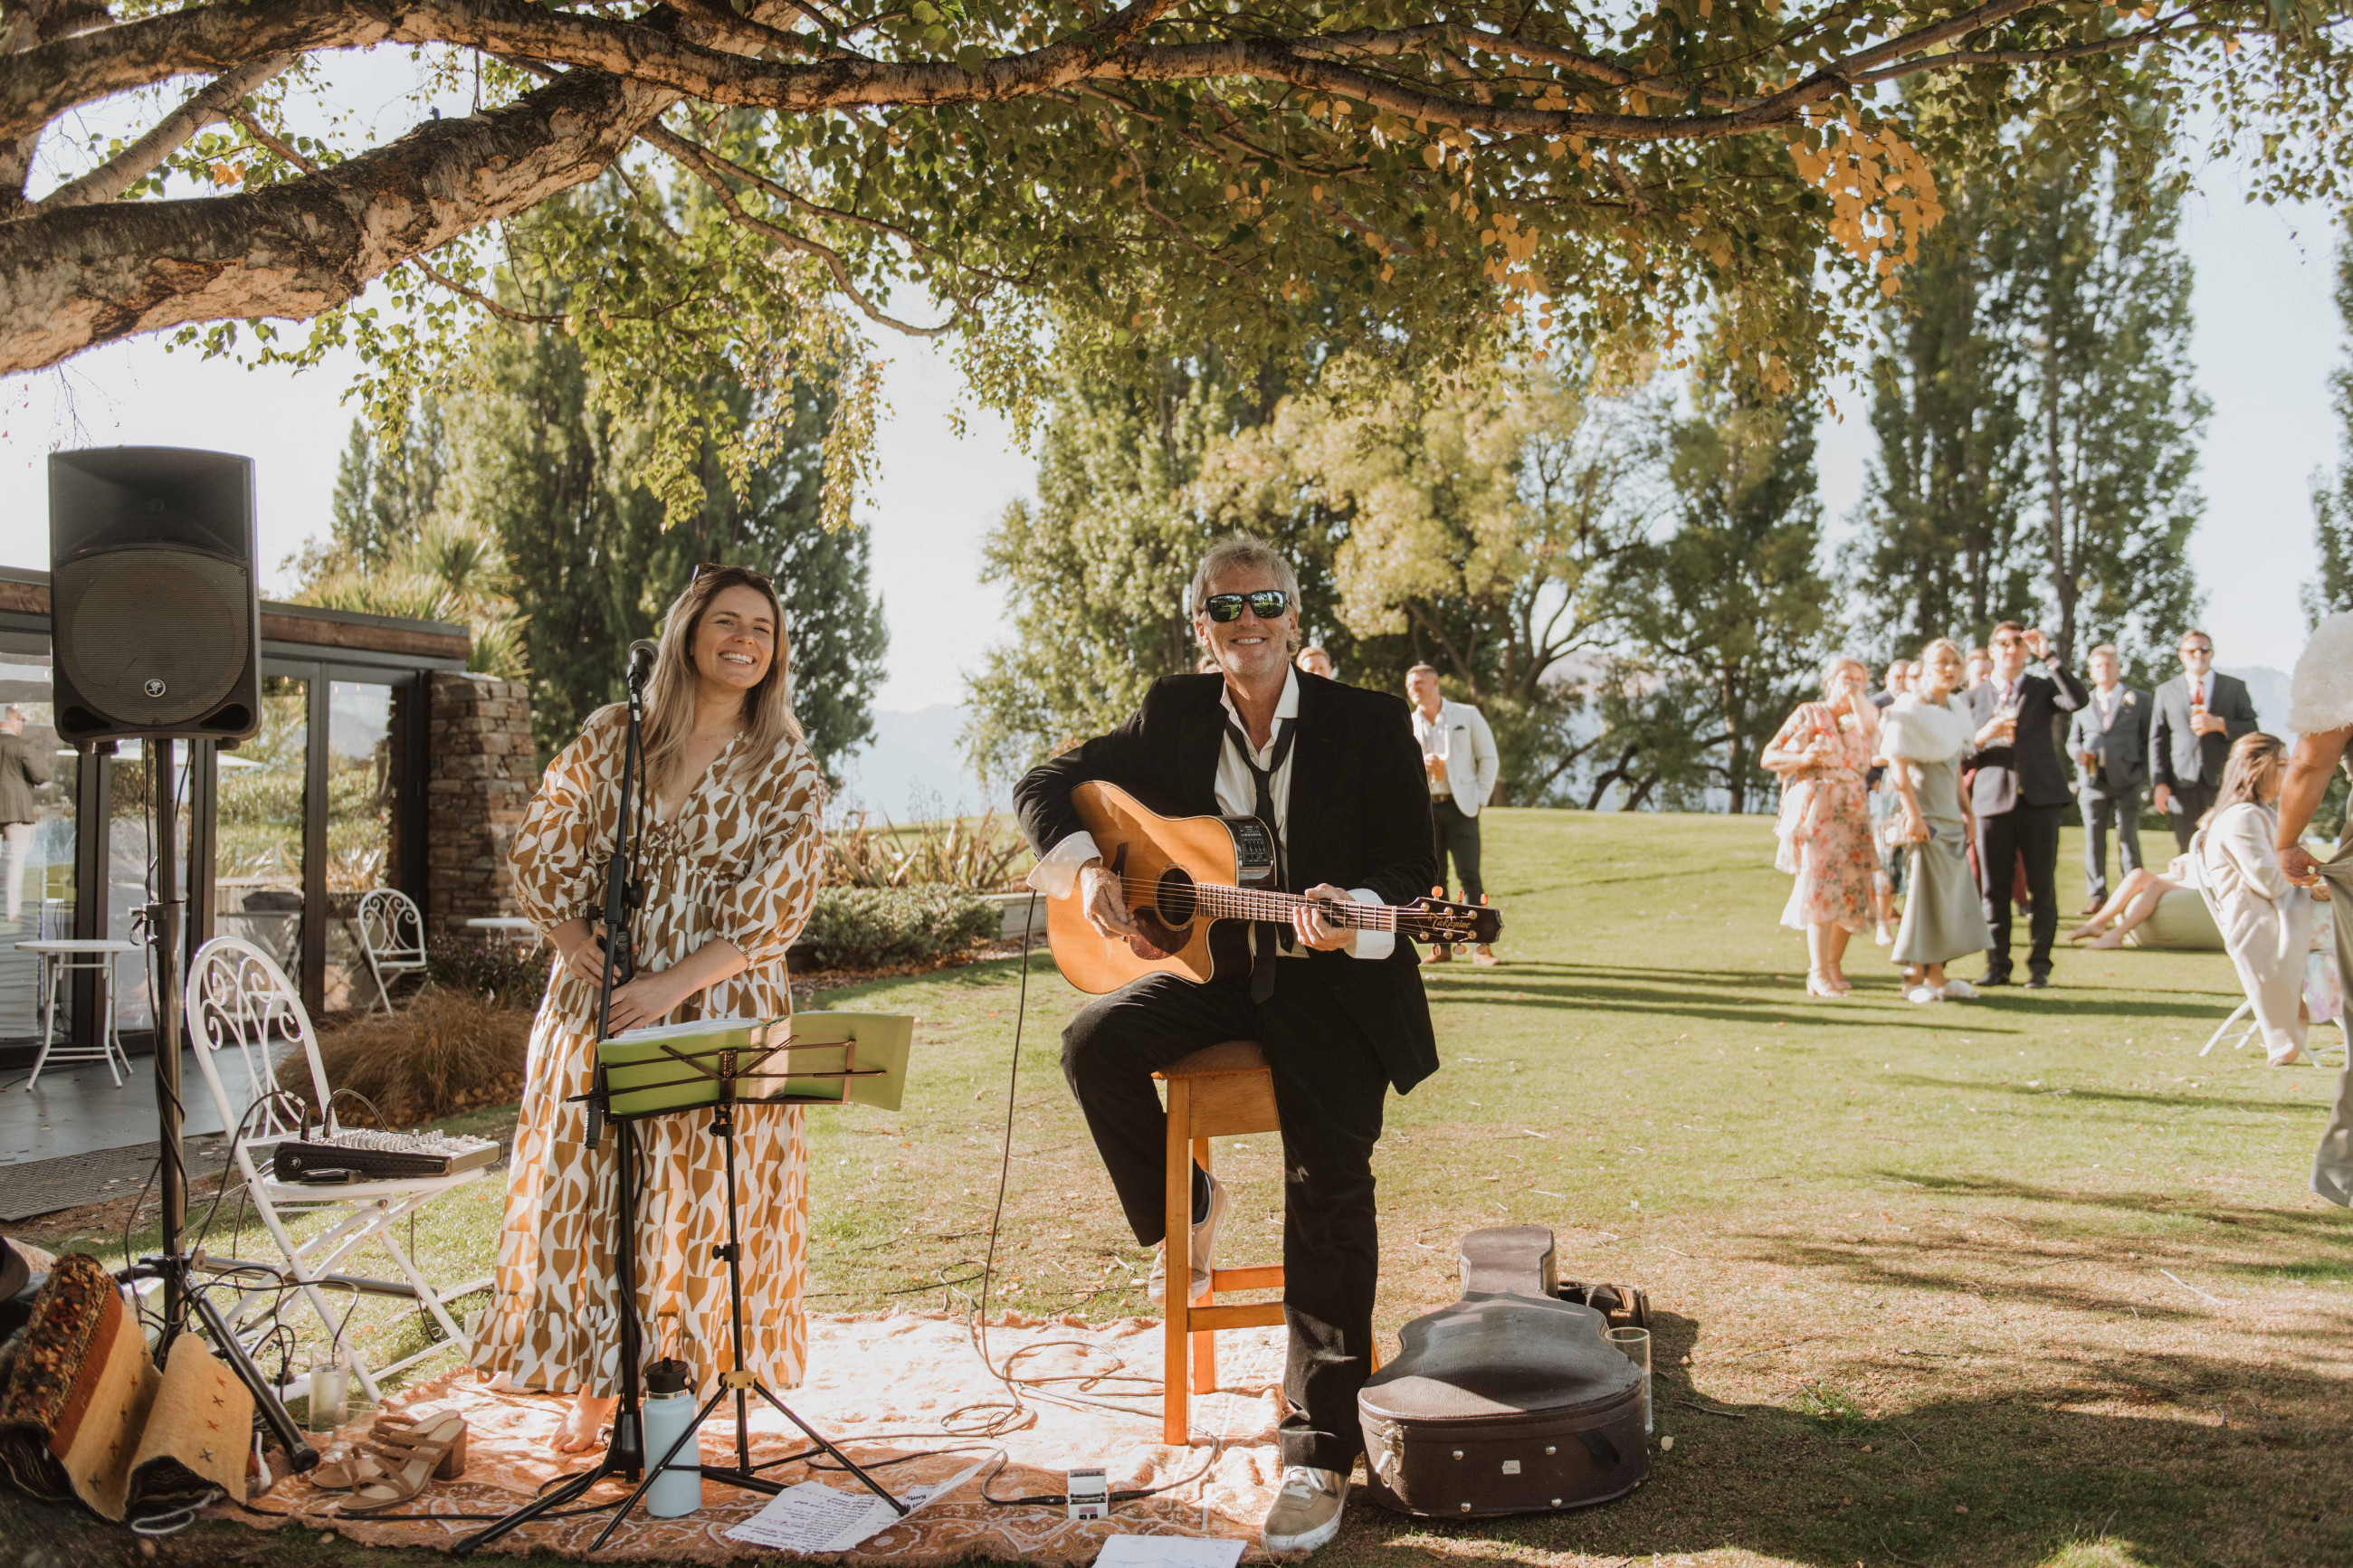 Lake Wanaka weddings at it's best with live entertainment!